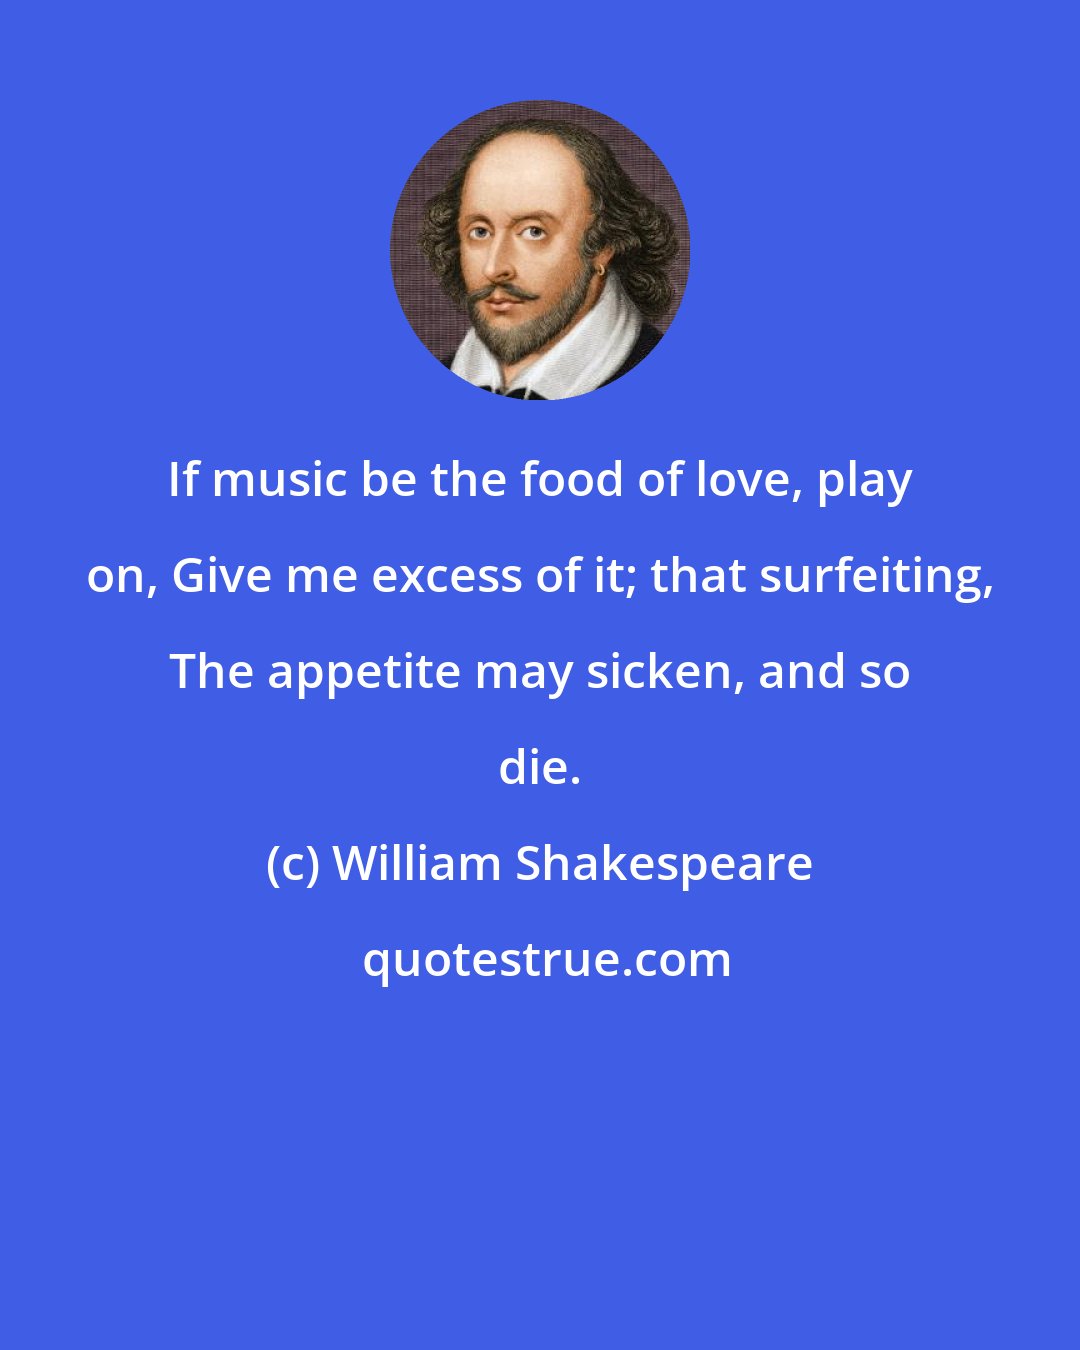 William Shakespeare: If music be the food of love, play on, Give me excess of it; that surfeiting, The appetite may sicken, and so die.